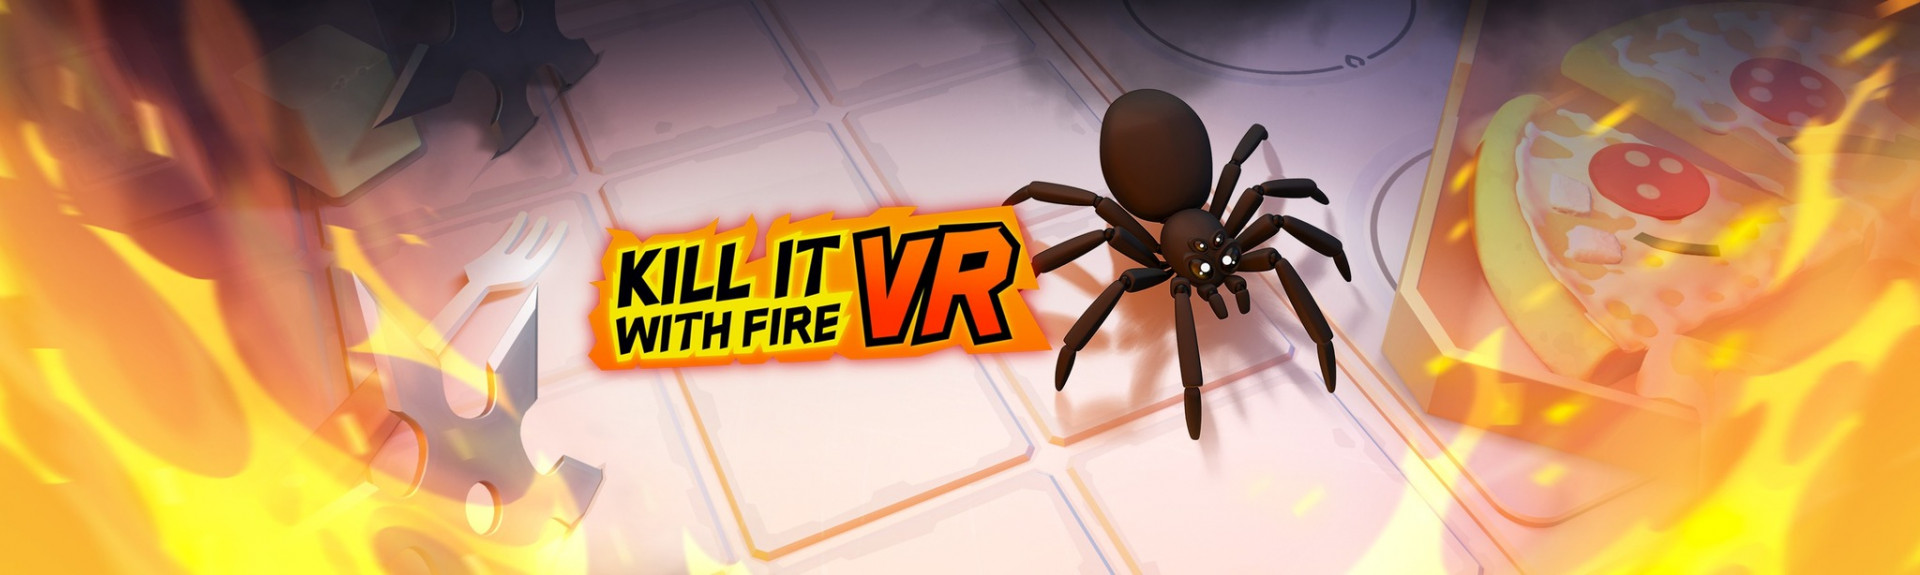 Kill it With Fire VR: ANÁLISIS